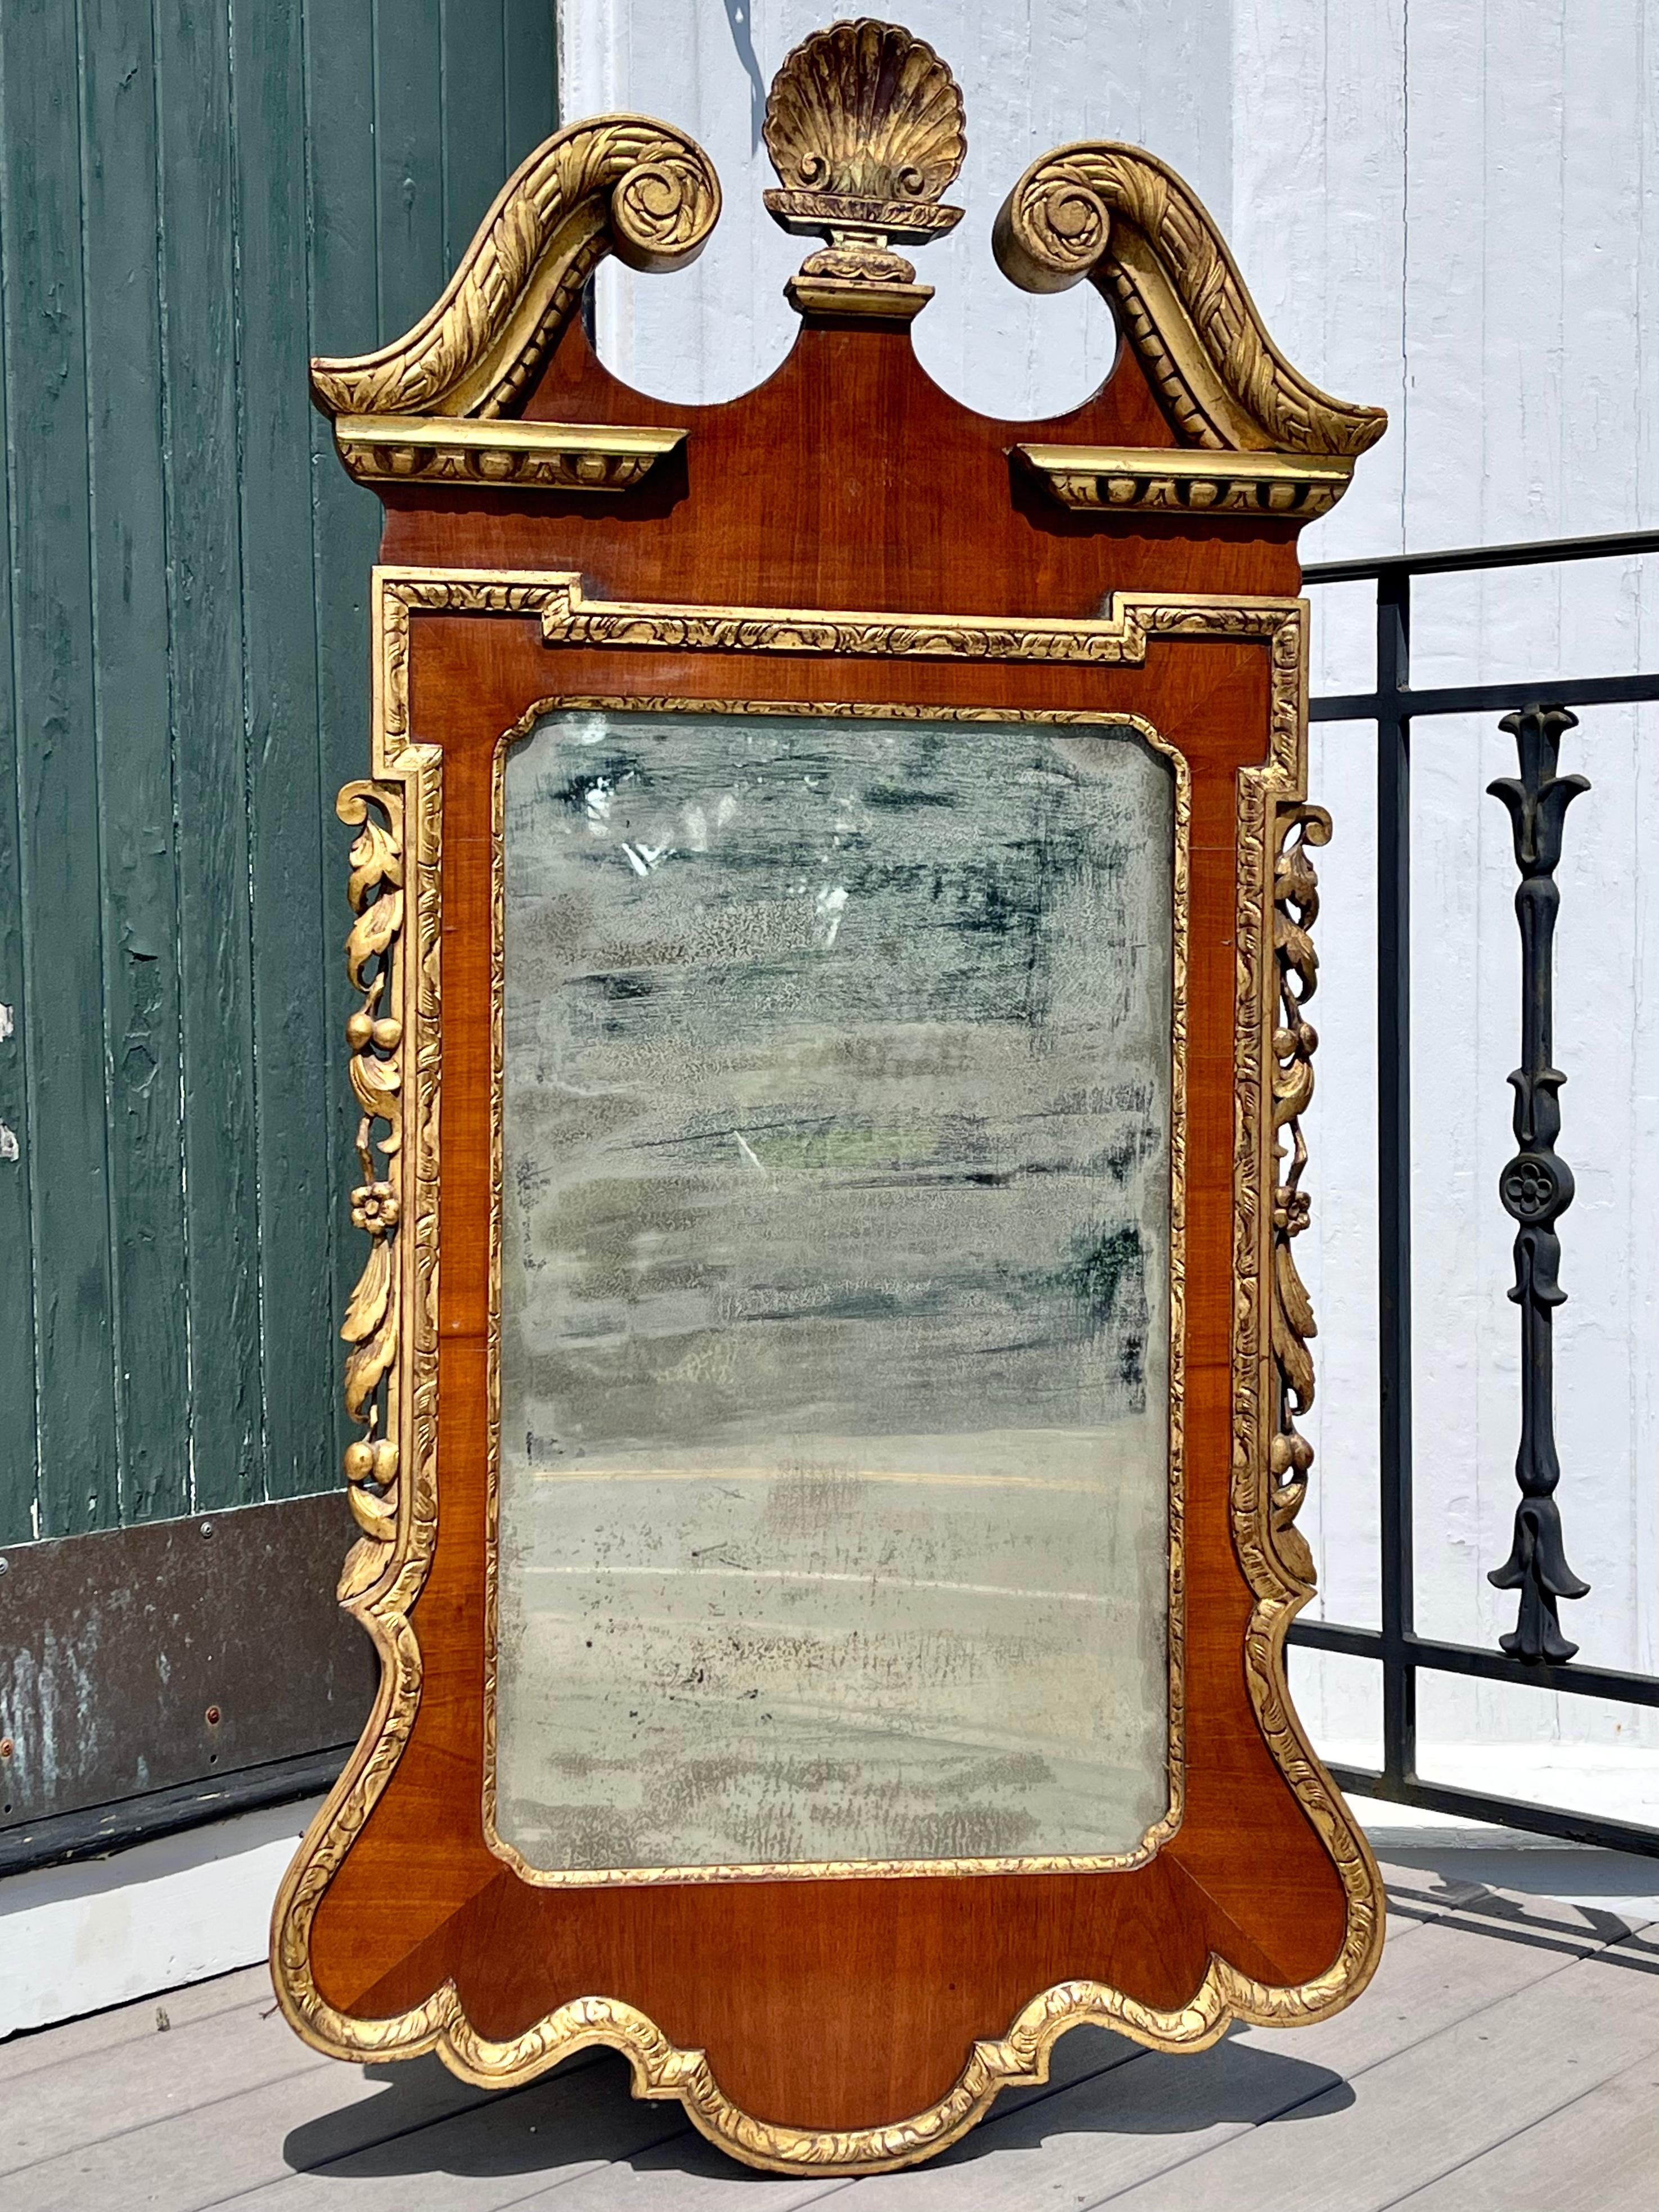 Fine 19th century Philadelphia walnut and gilt chippendale pier mirror. Gilt festoons of foliage and fruit flanking a walnut frame trimmed in gilded georgian carving. Shell Carving as finial. Naturally aged mirror plate provides a wonderful period